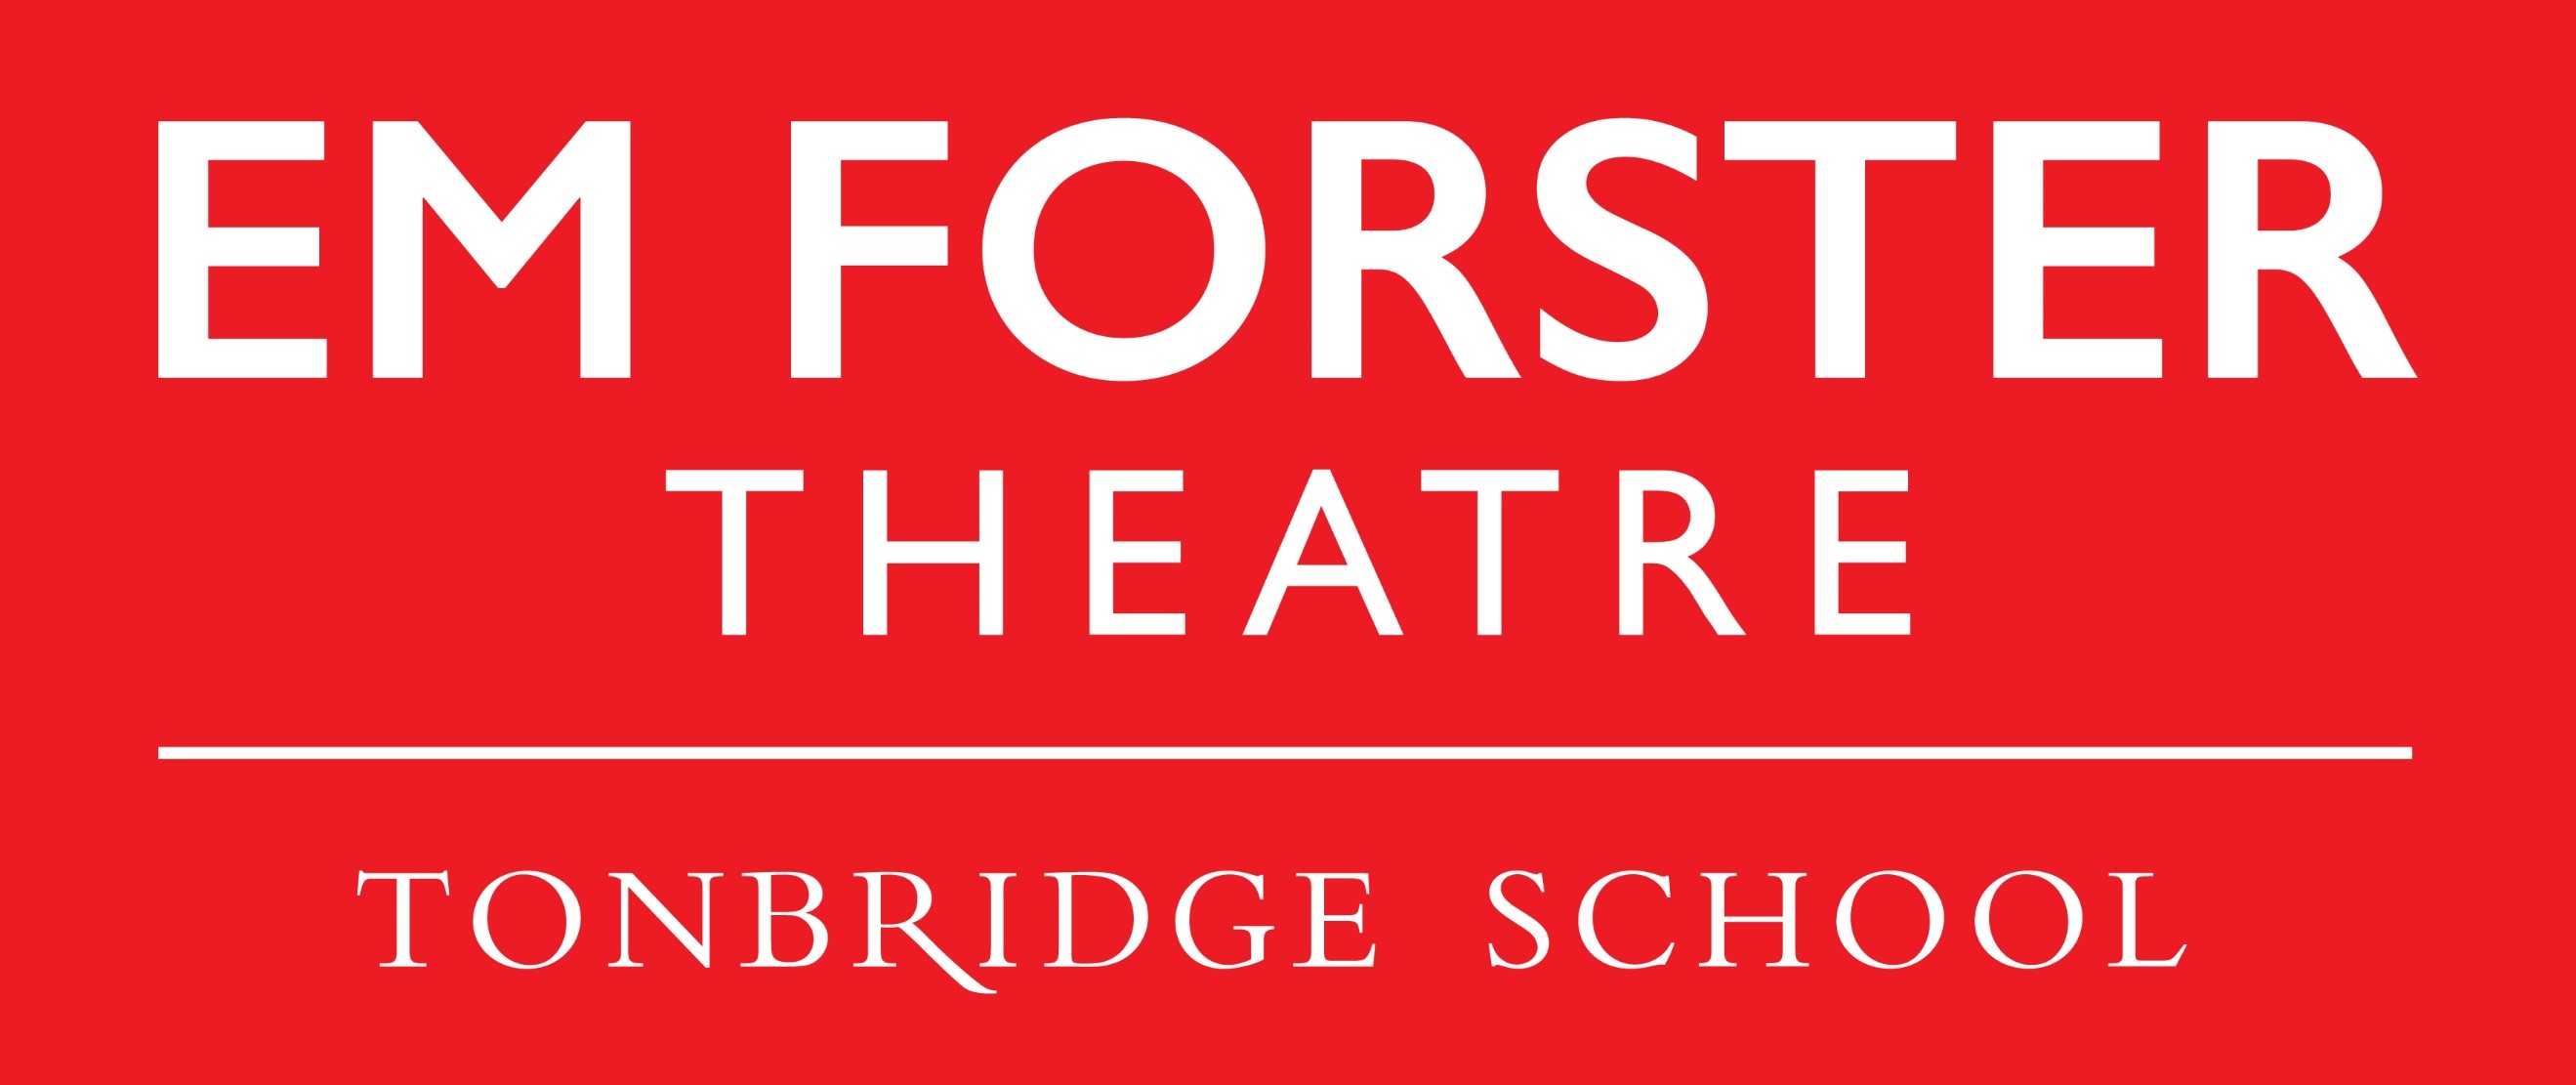 OUT OF THE HAT AT EM FORSTER THEATRE logo